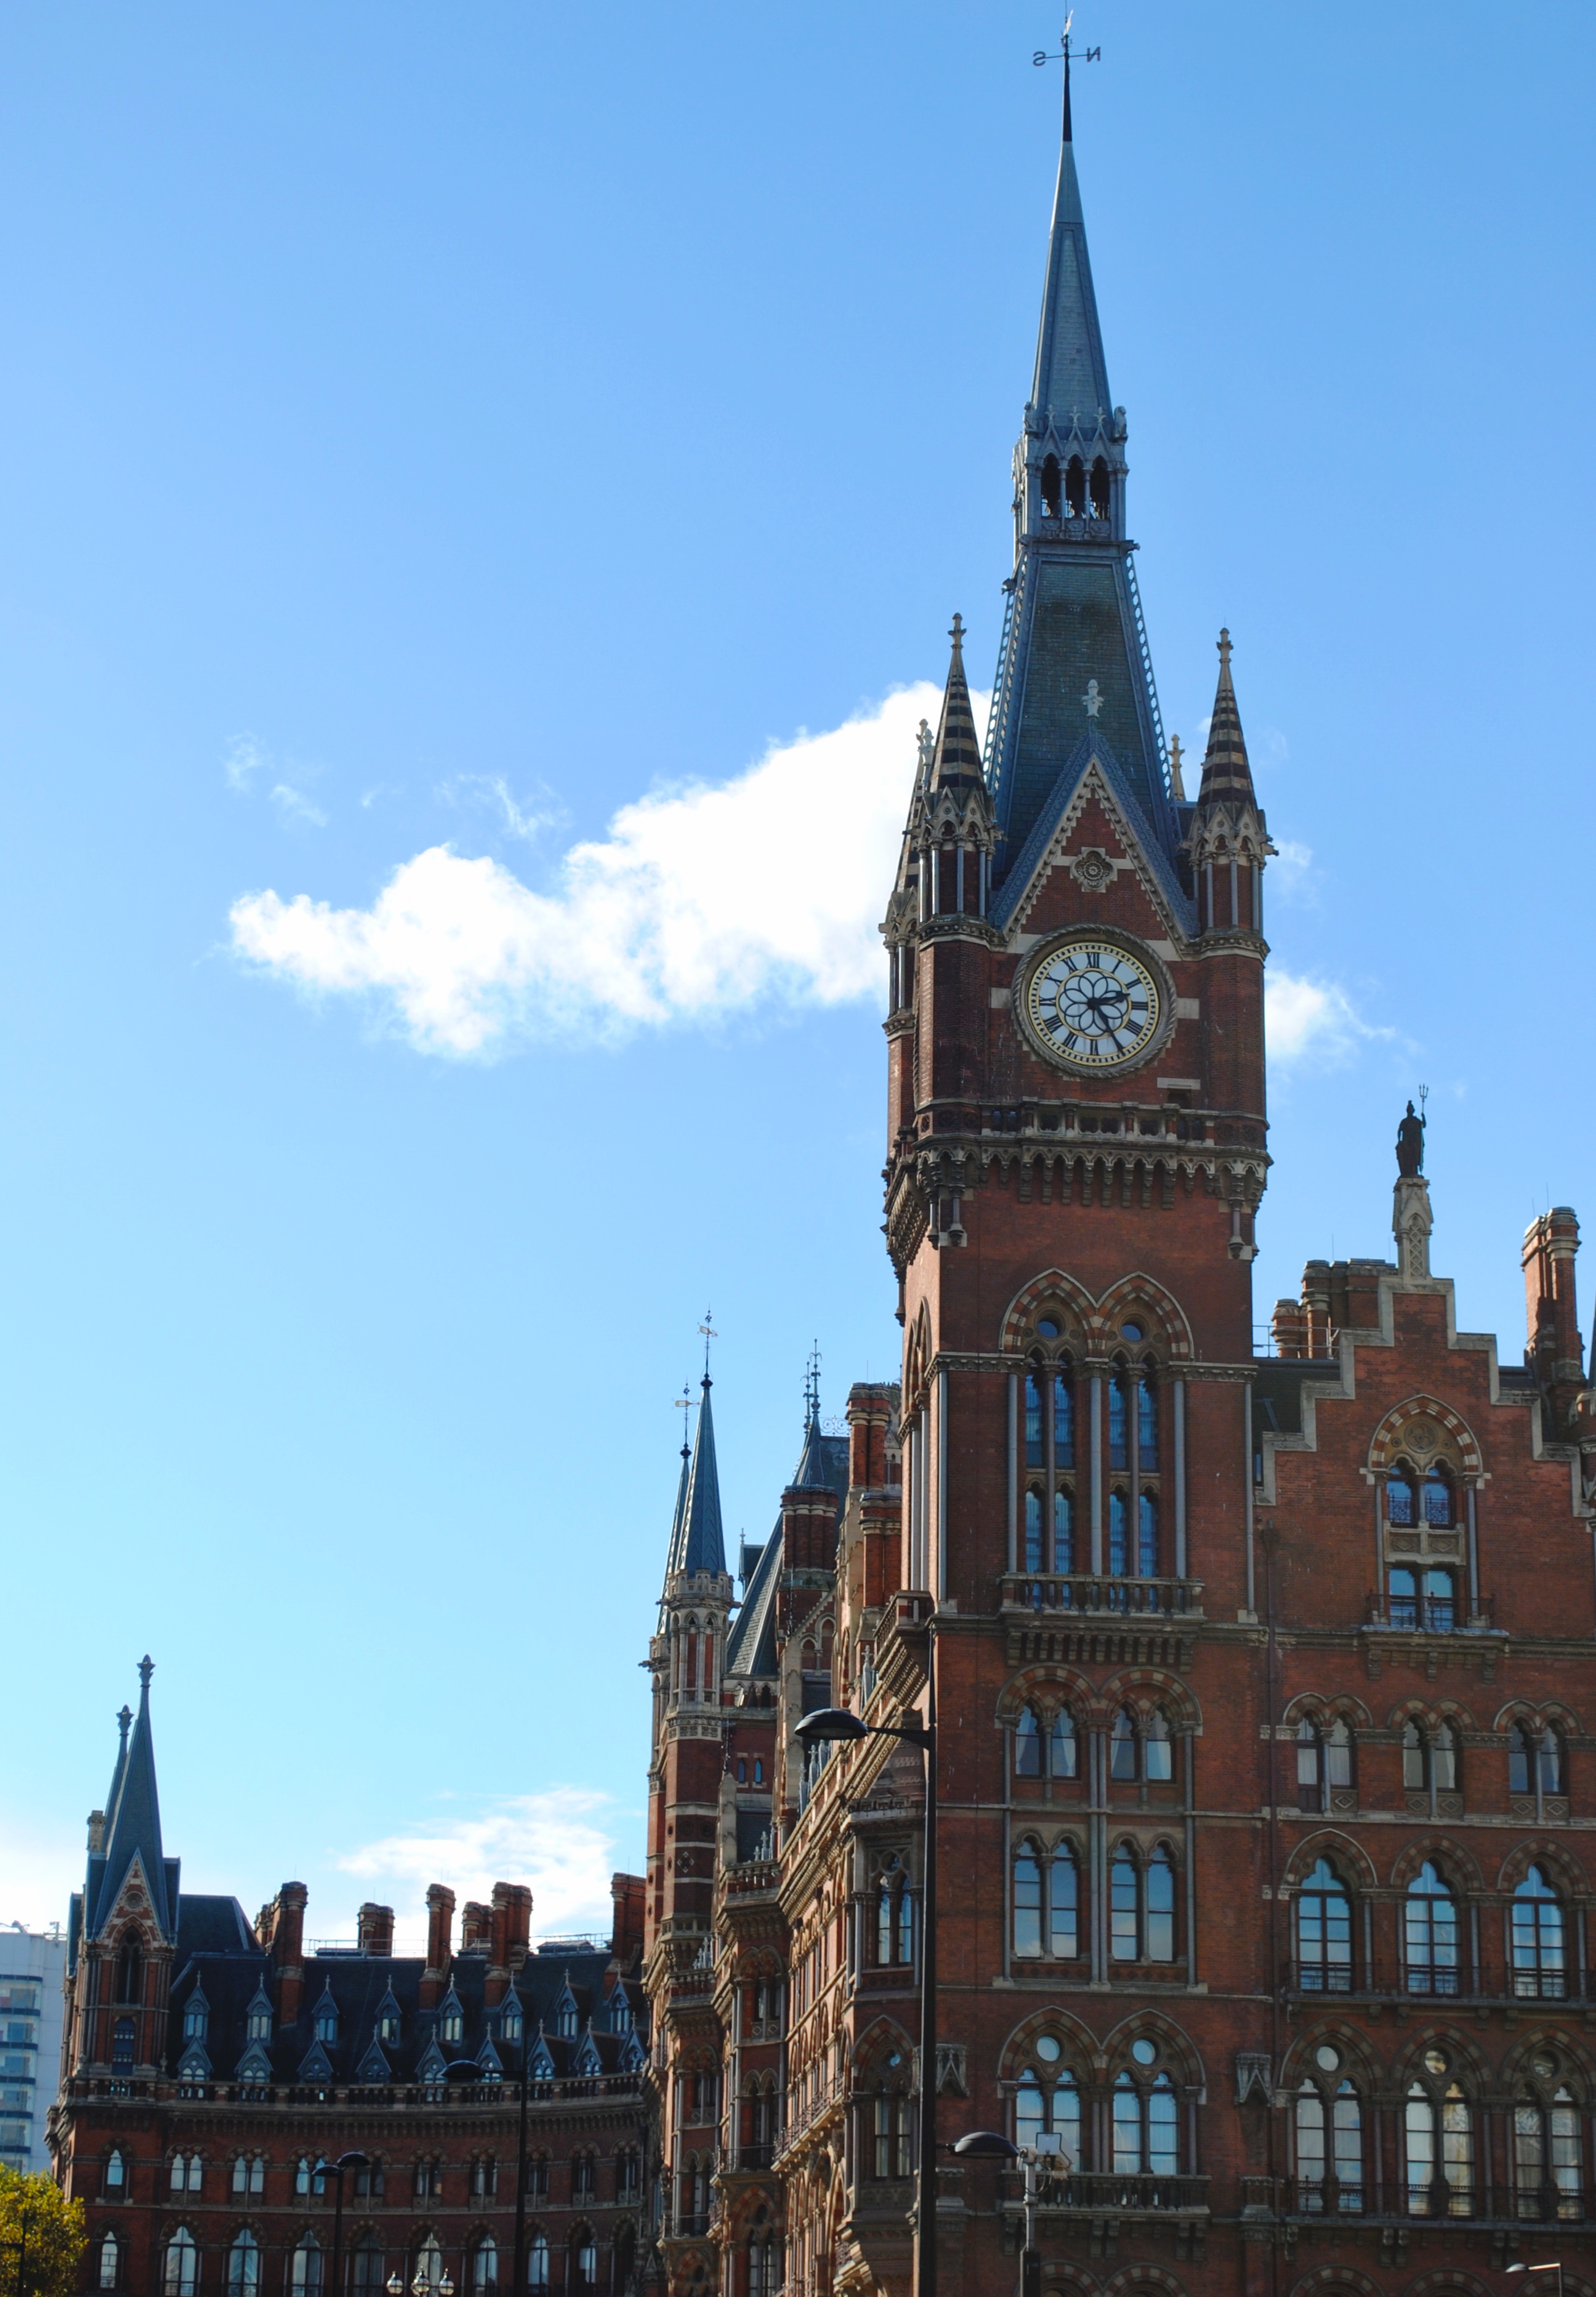 St. Pancras Station in London